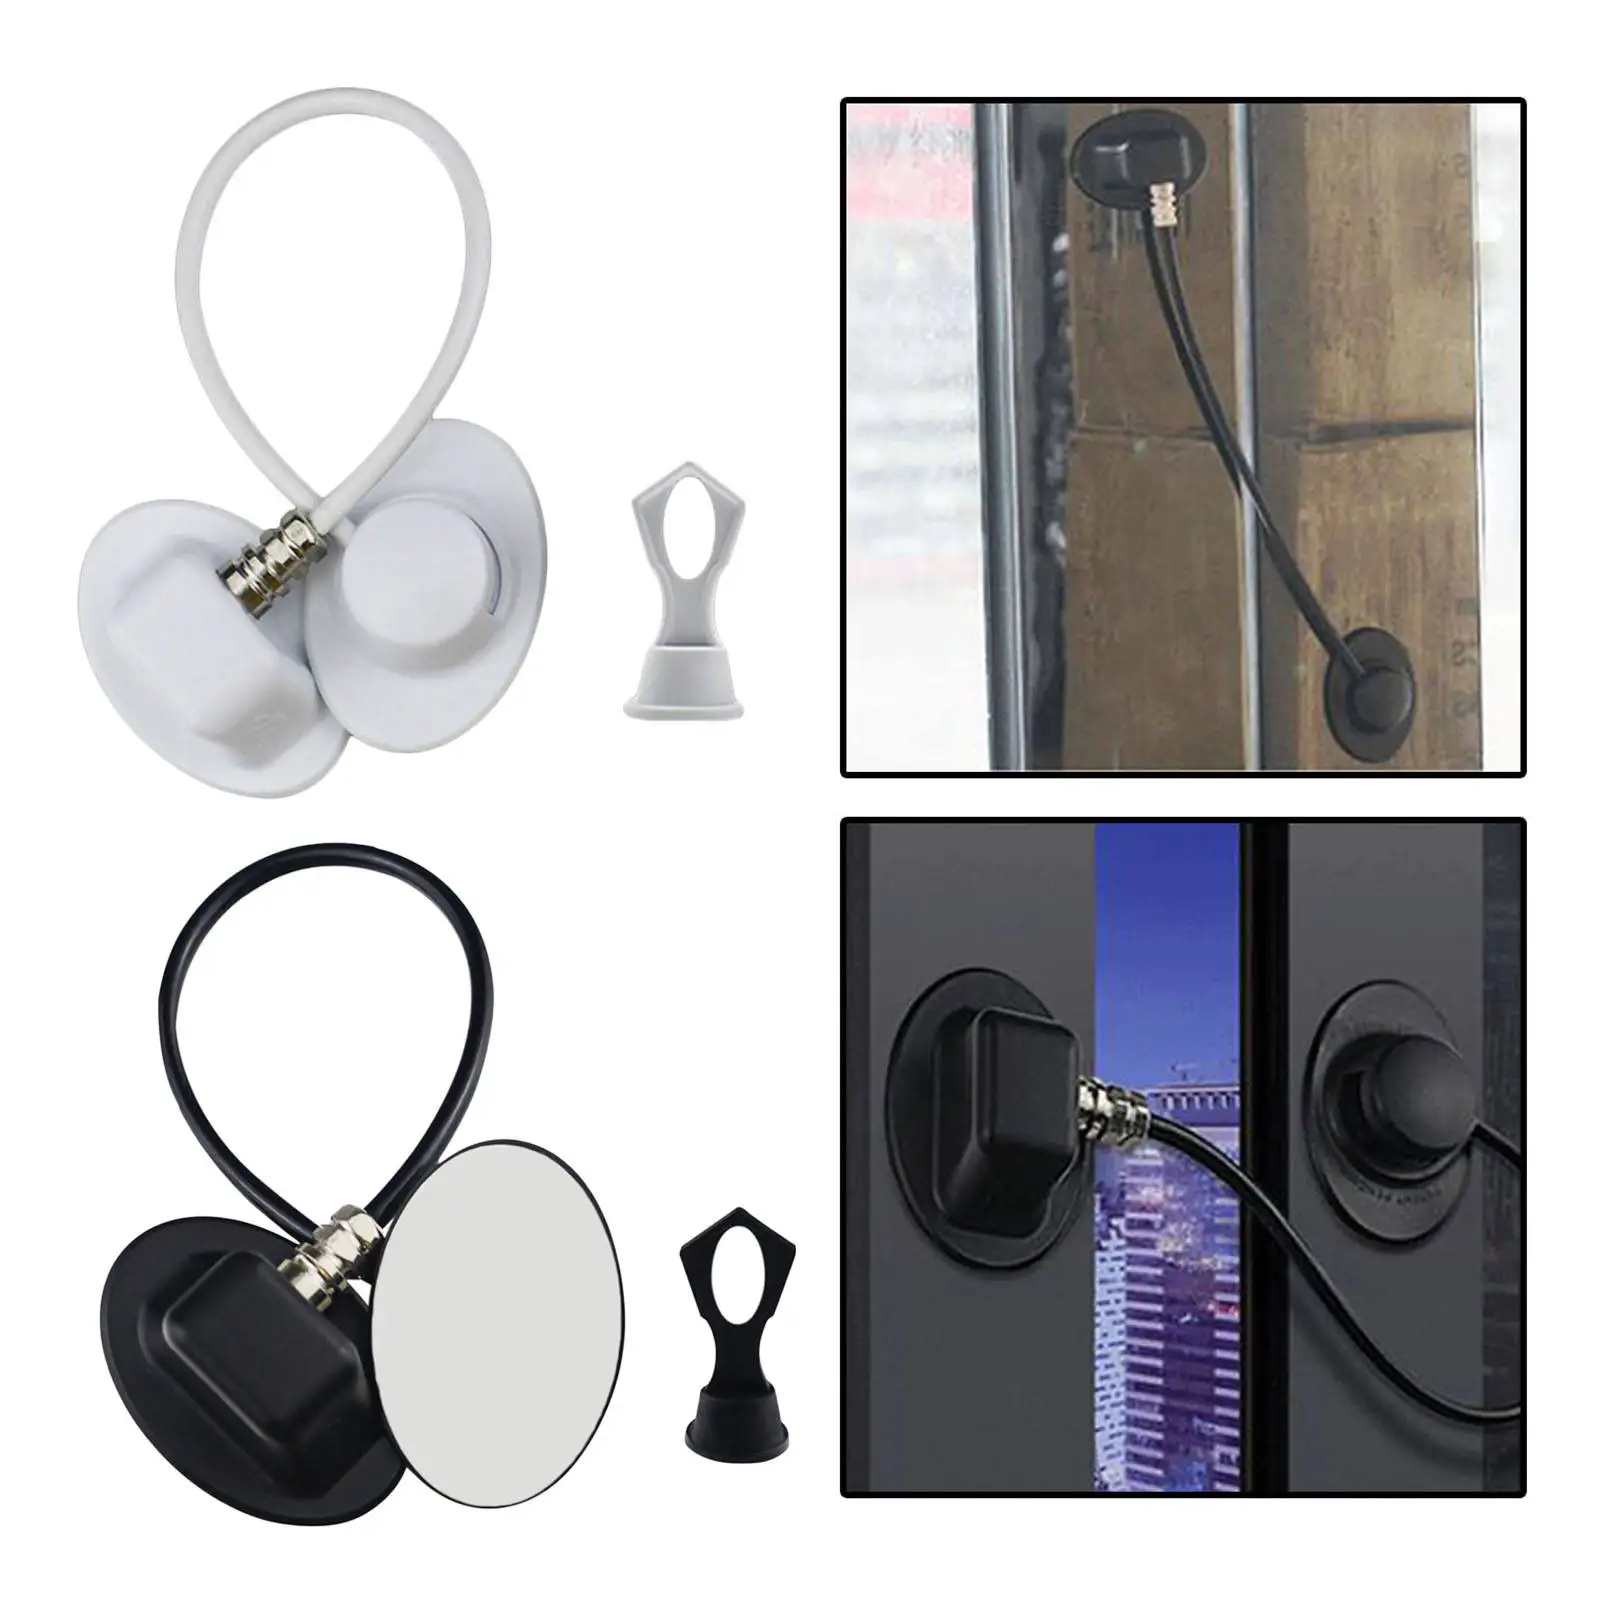 Magnetic Safety Lock No Drills Anti-Pinching Fingers Good Viscosity Childproof Limiter Plastic for Cupboard Door Window Drawer